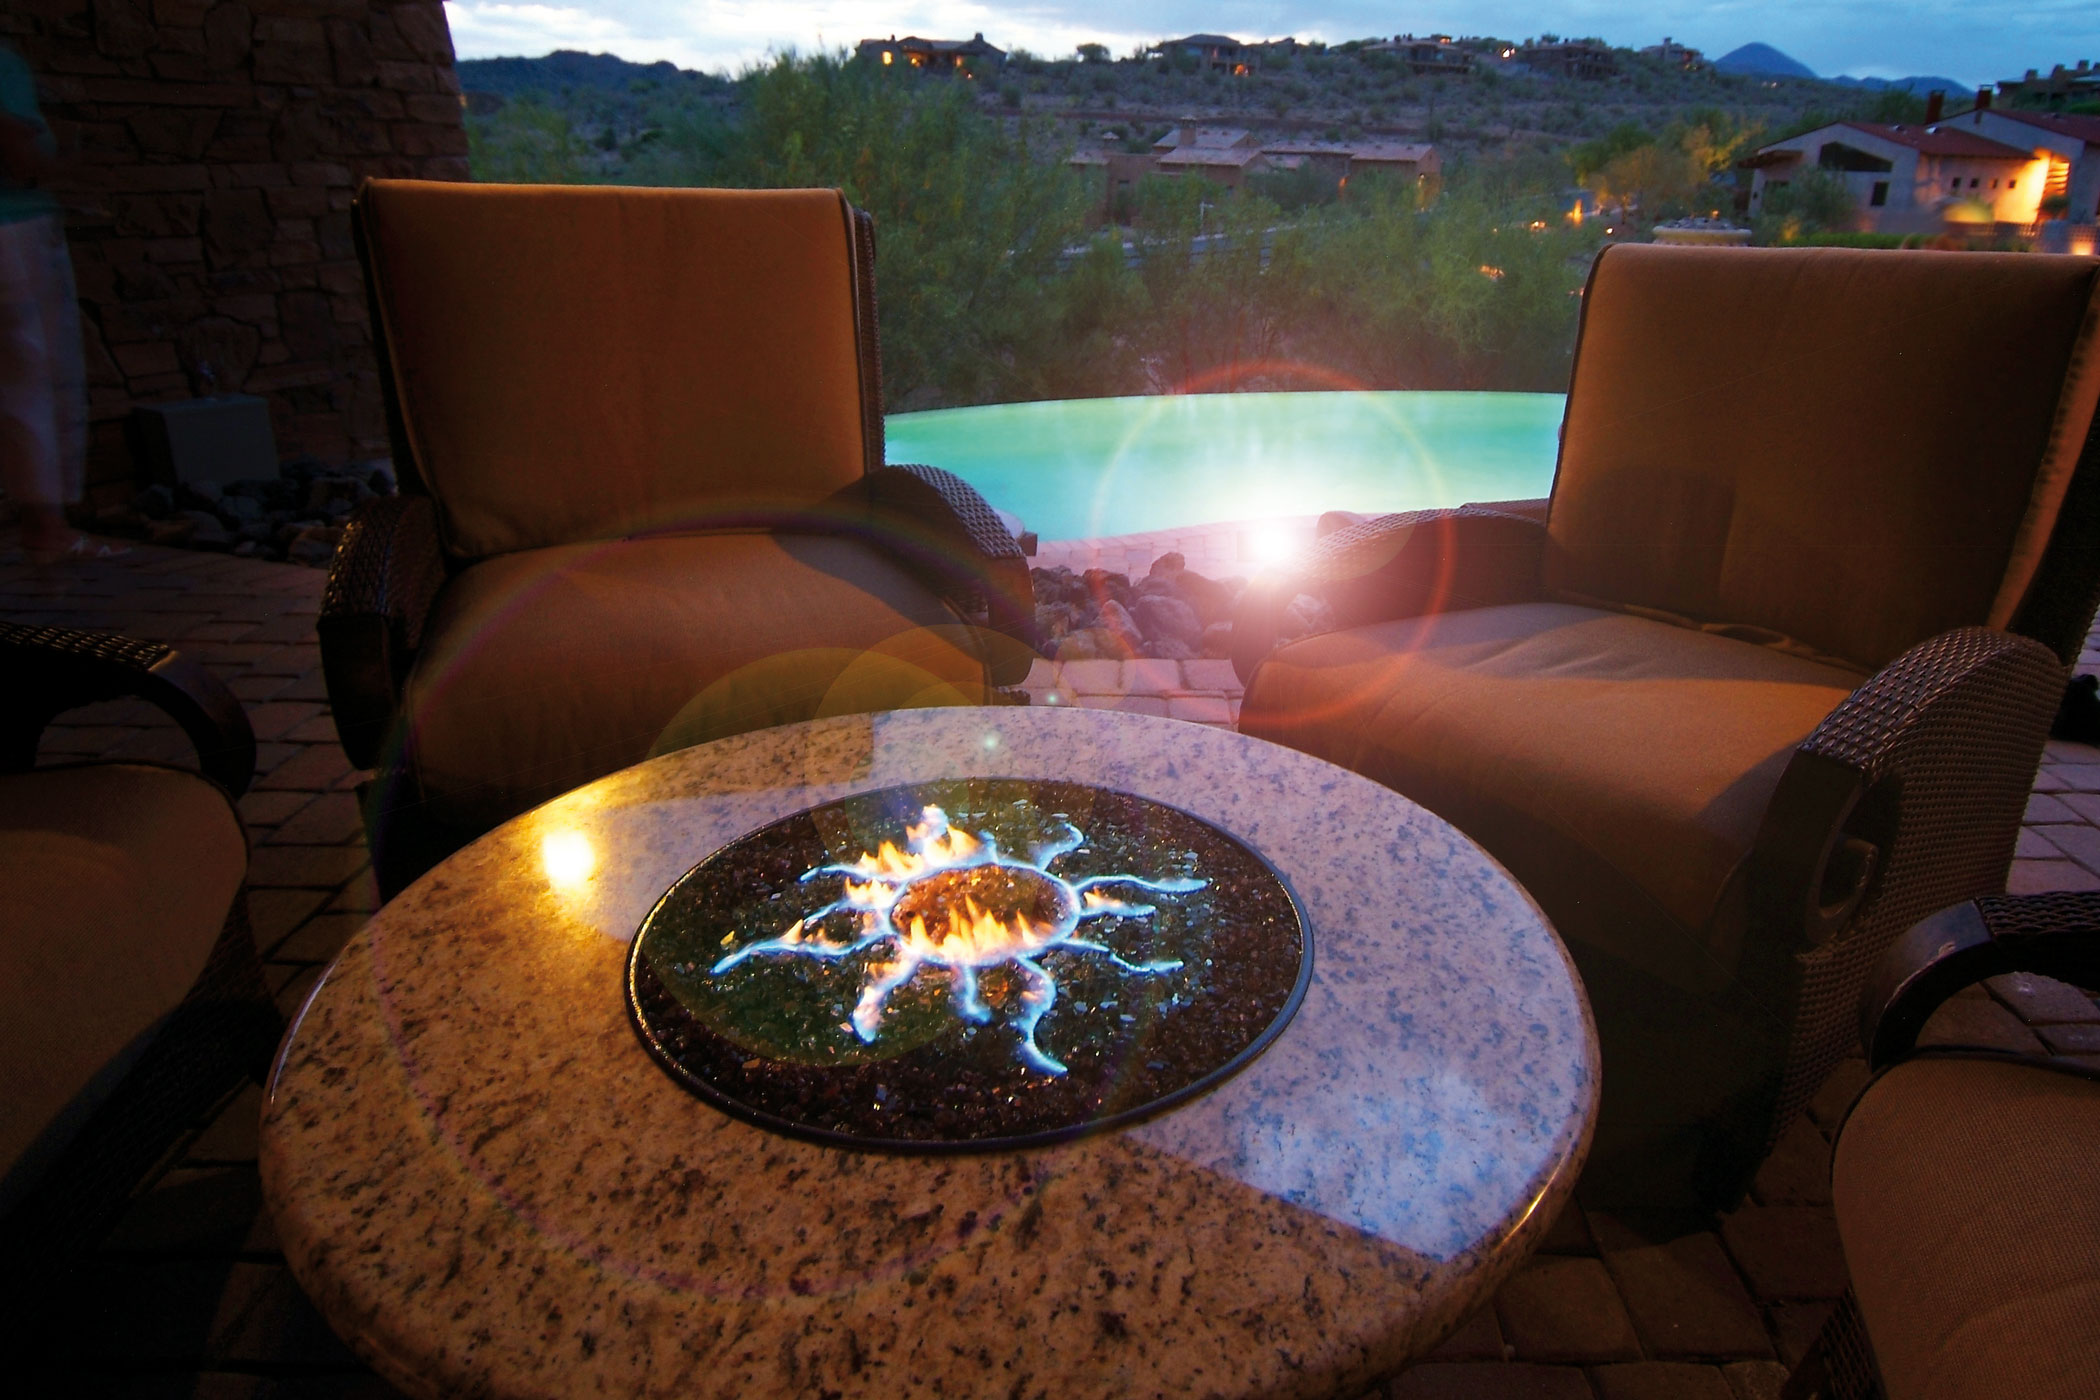 Designing Fire – Manufacturer of the Oriflamme Fire Tables